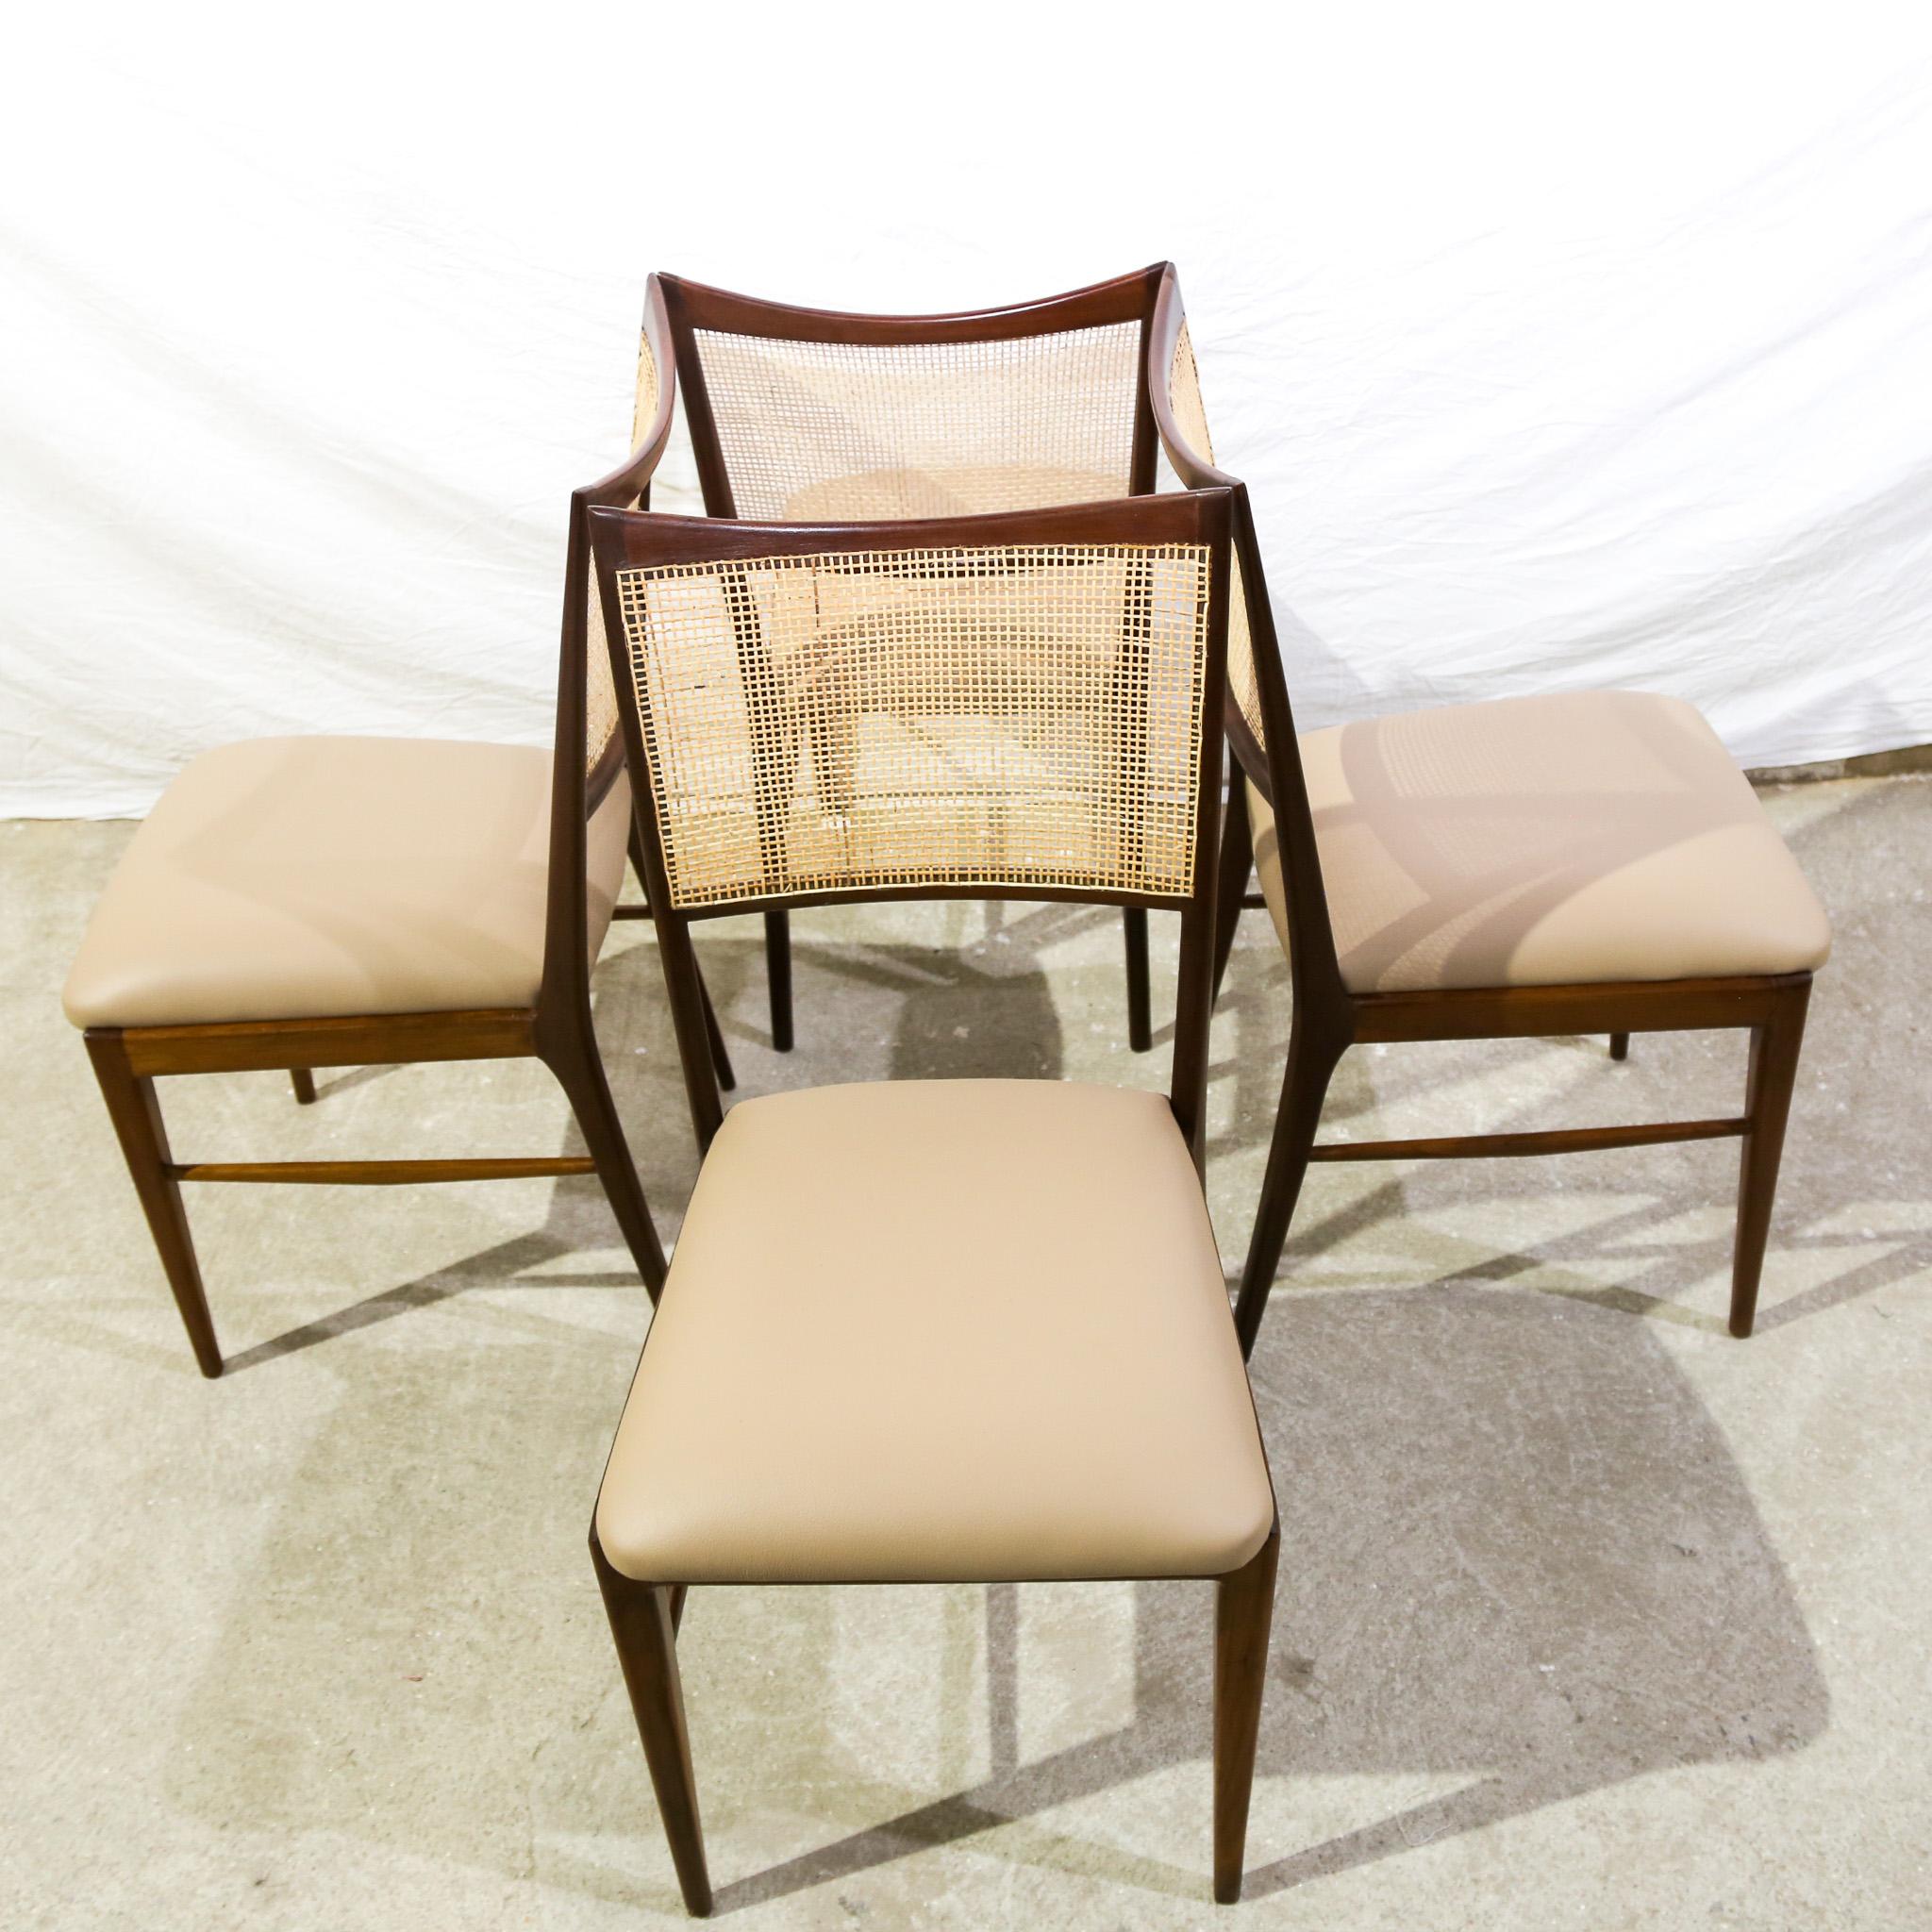 Brazilian Modern Set of Four Chairs in Hardwood & Beige Leather, Unknown, 1960s In Good Condition For Sale In New York, NY